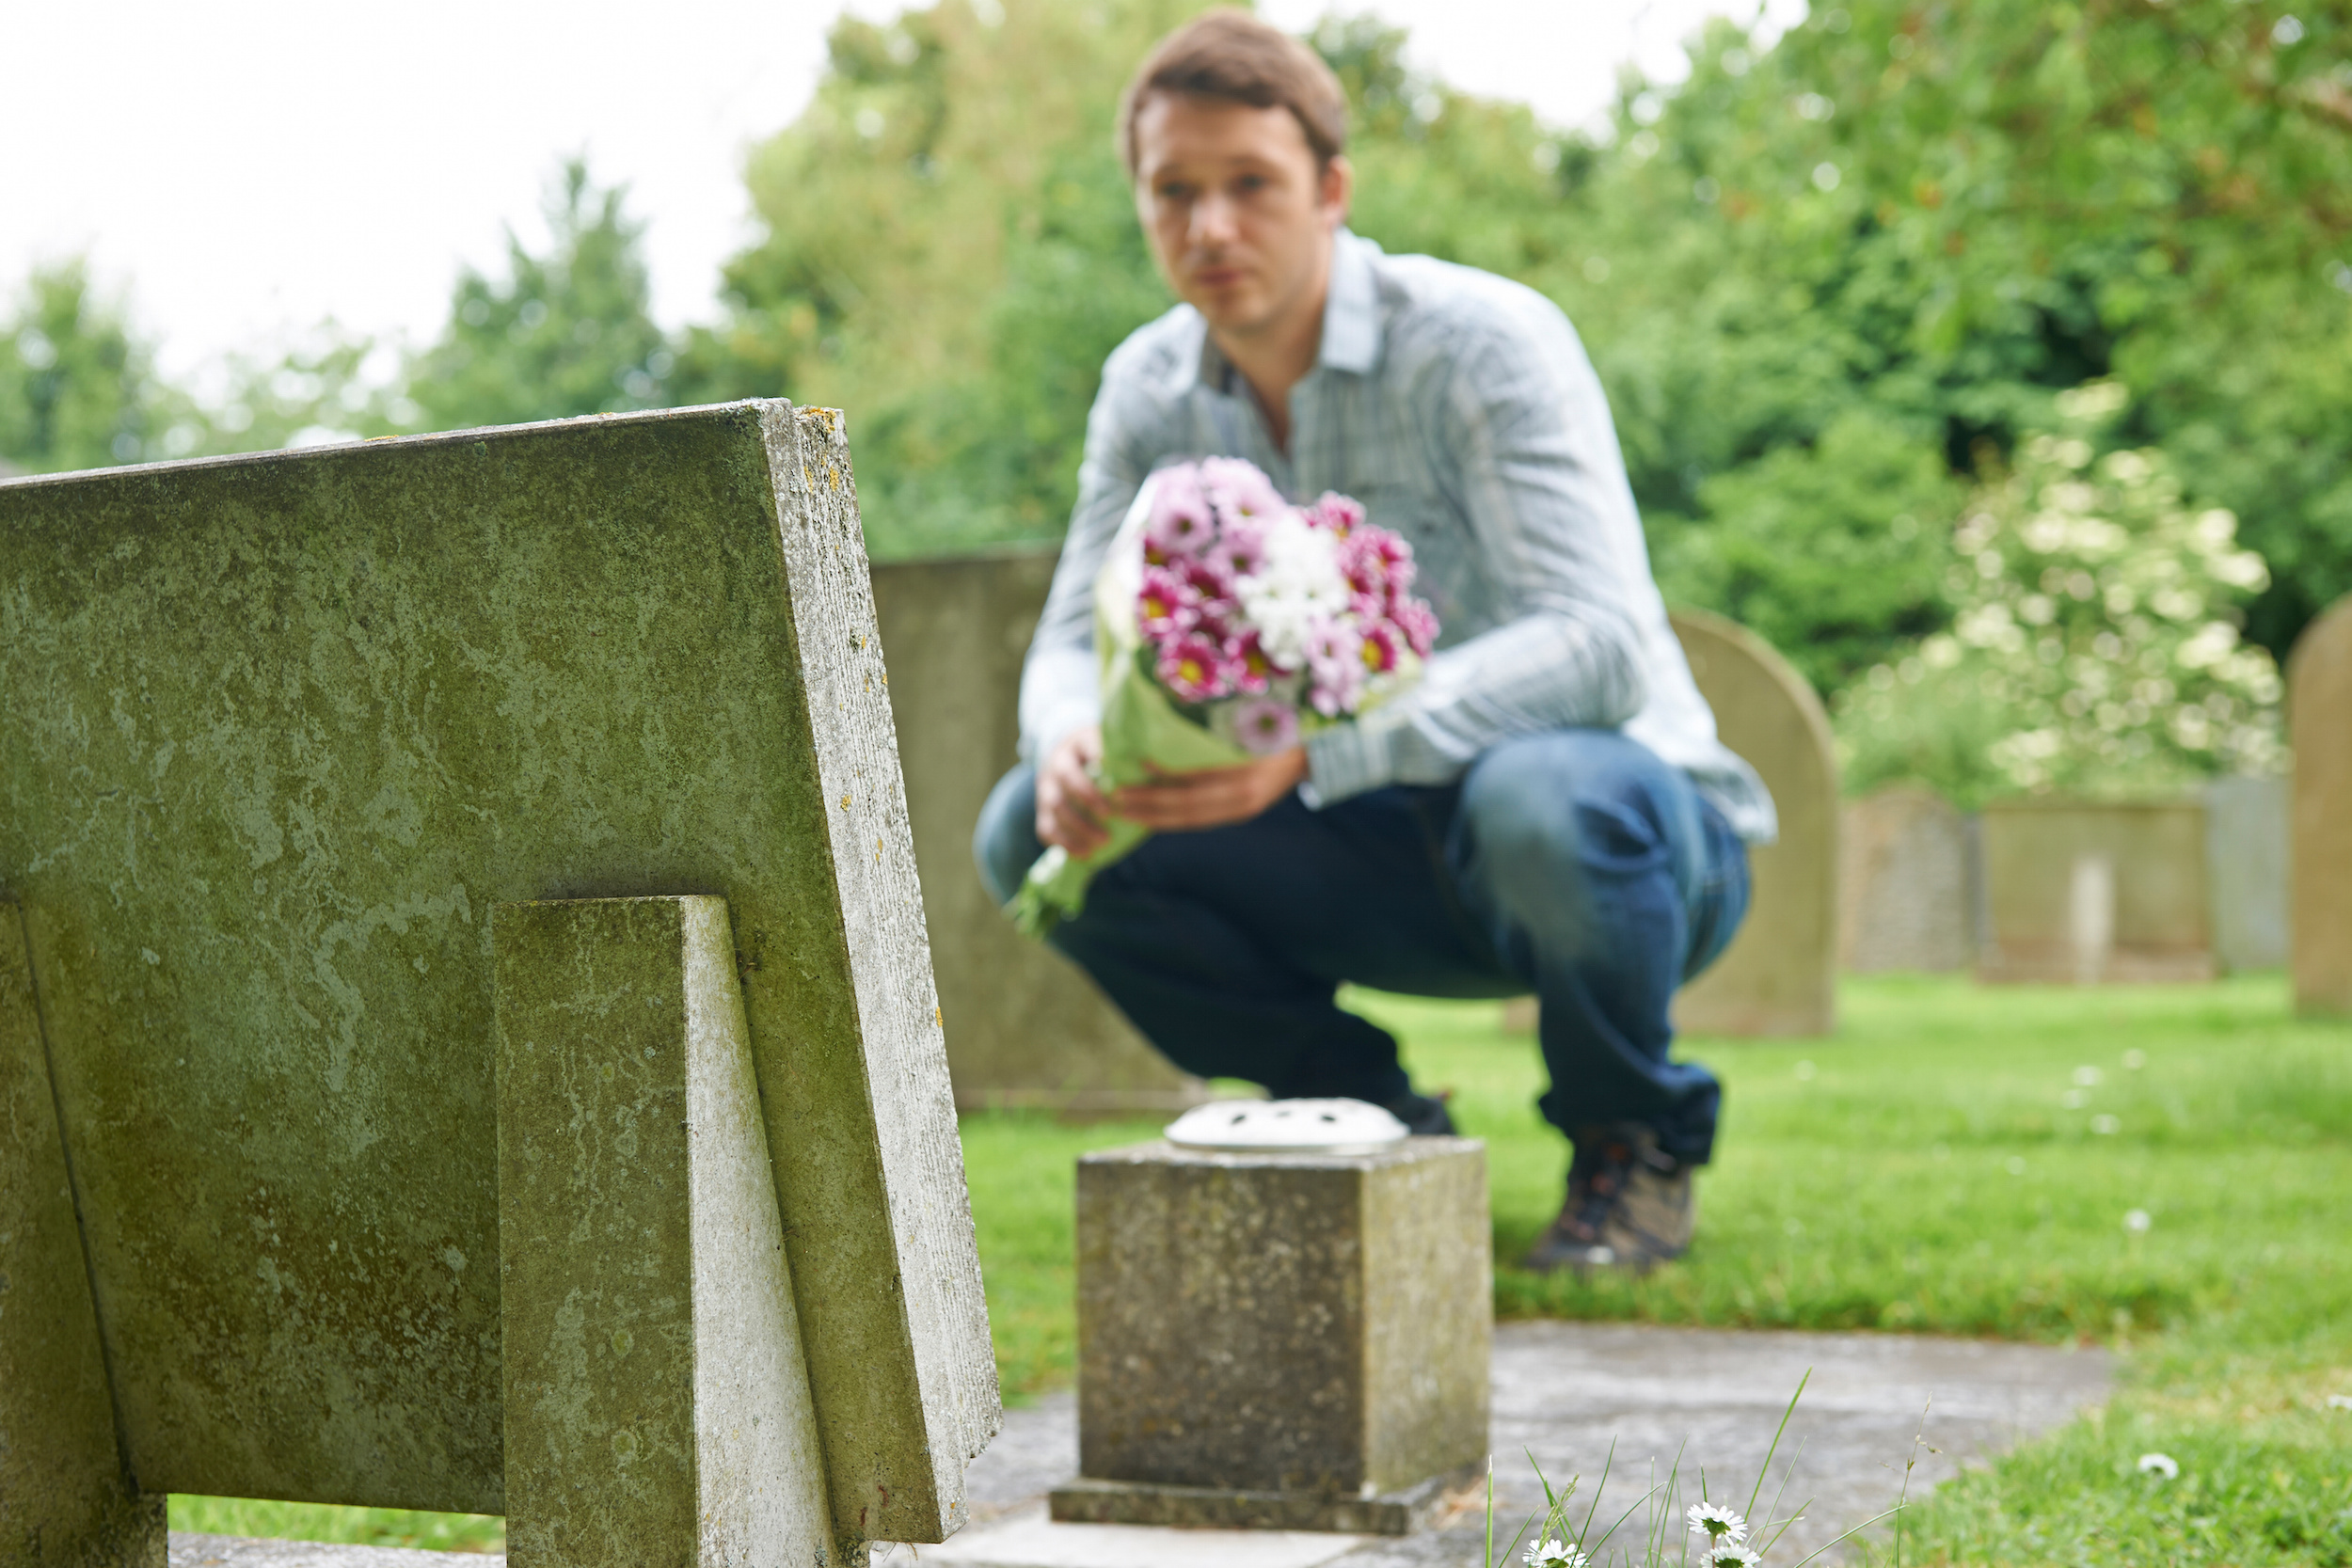 Wrongful Death Attorney 